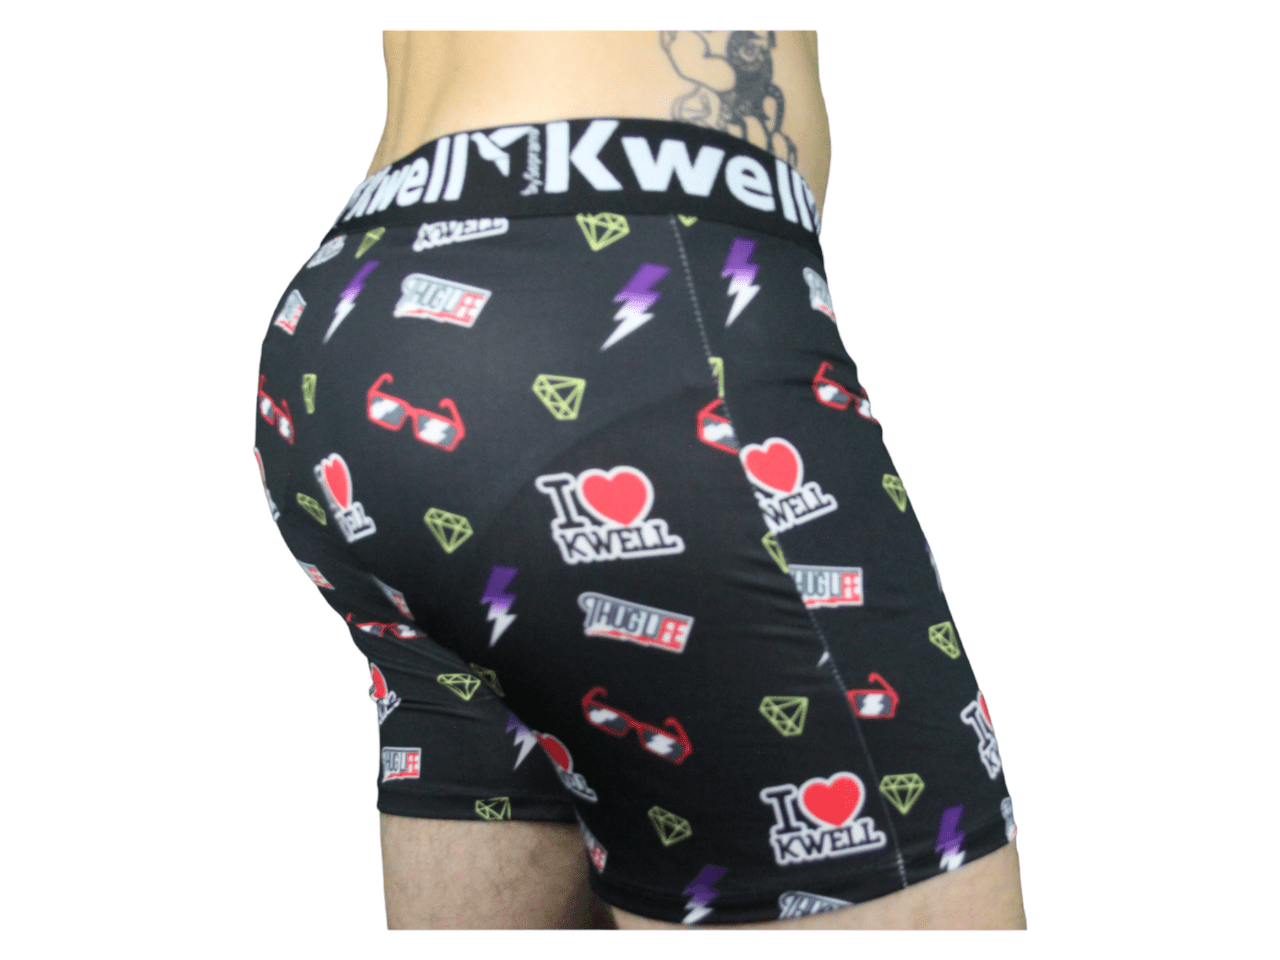 BOXER KWELL by Soprano